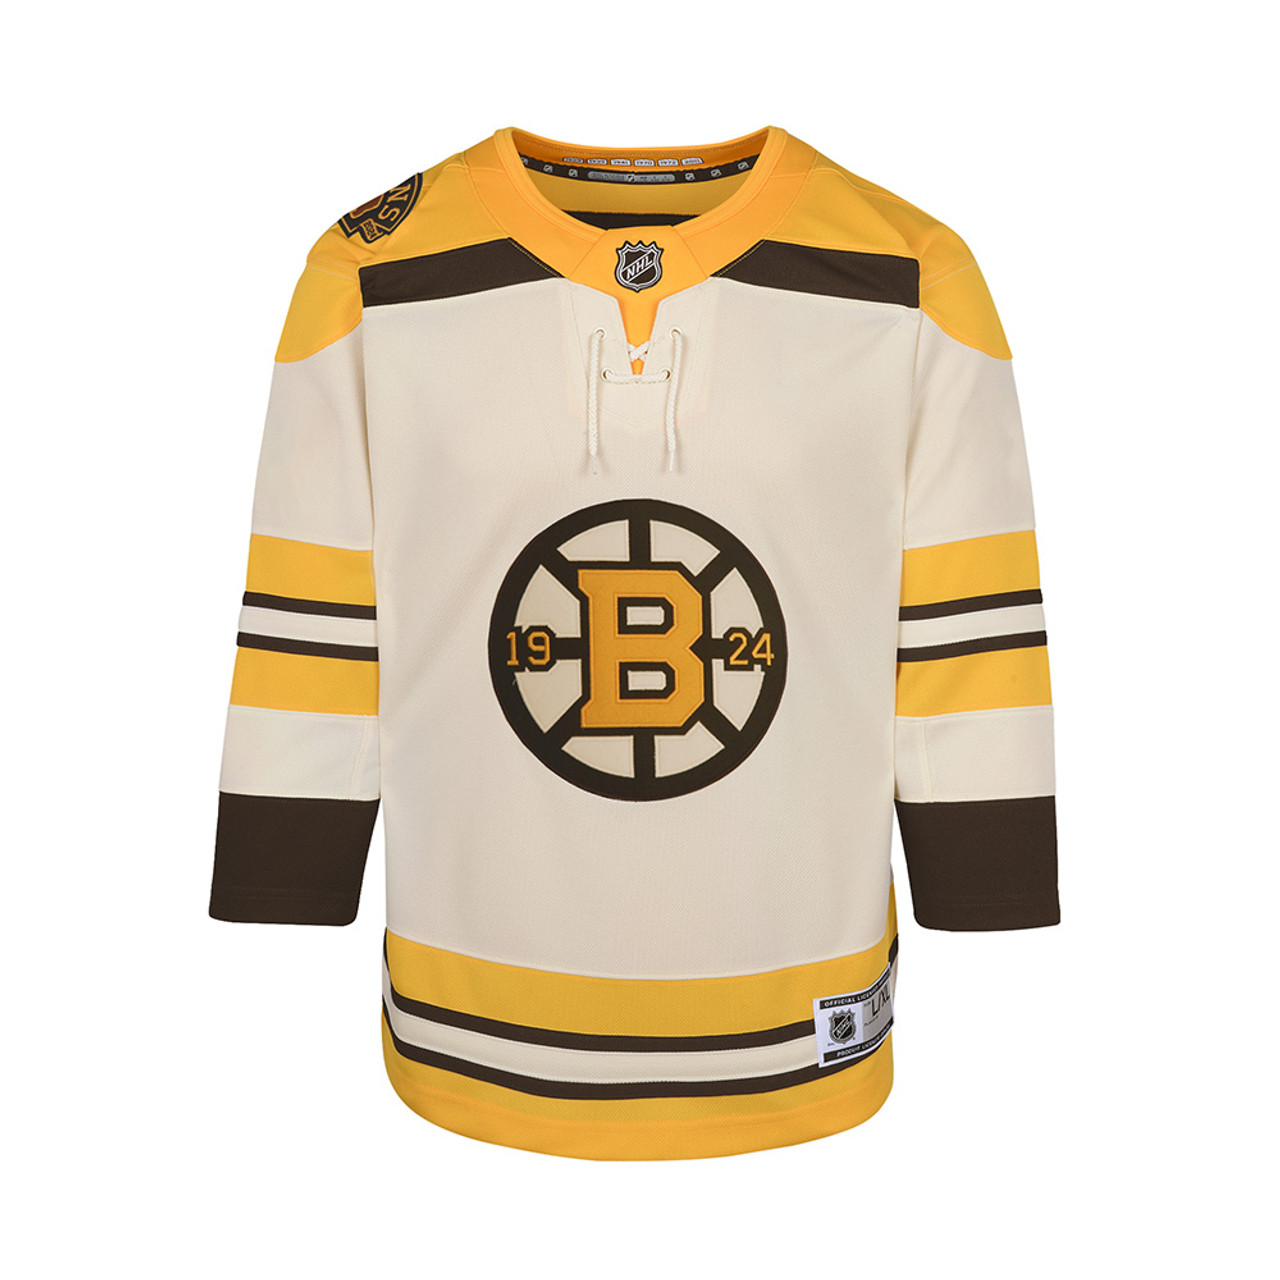 Reviewing the Boston Bruins new alternate jerseys